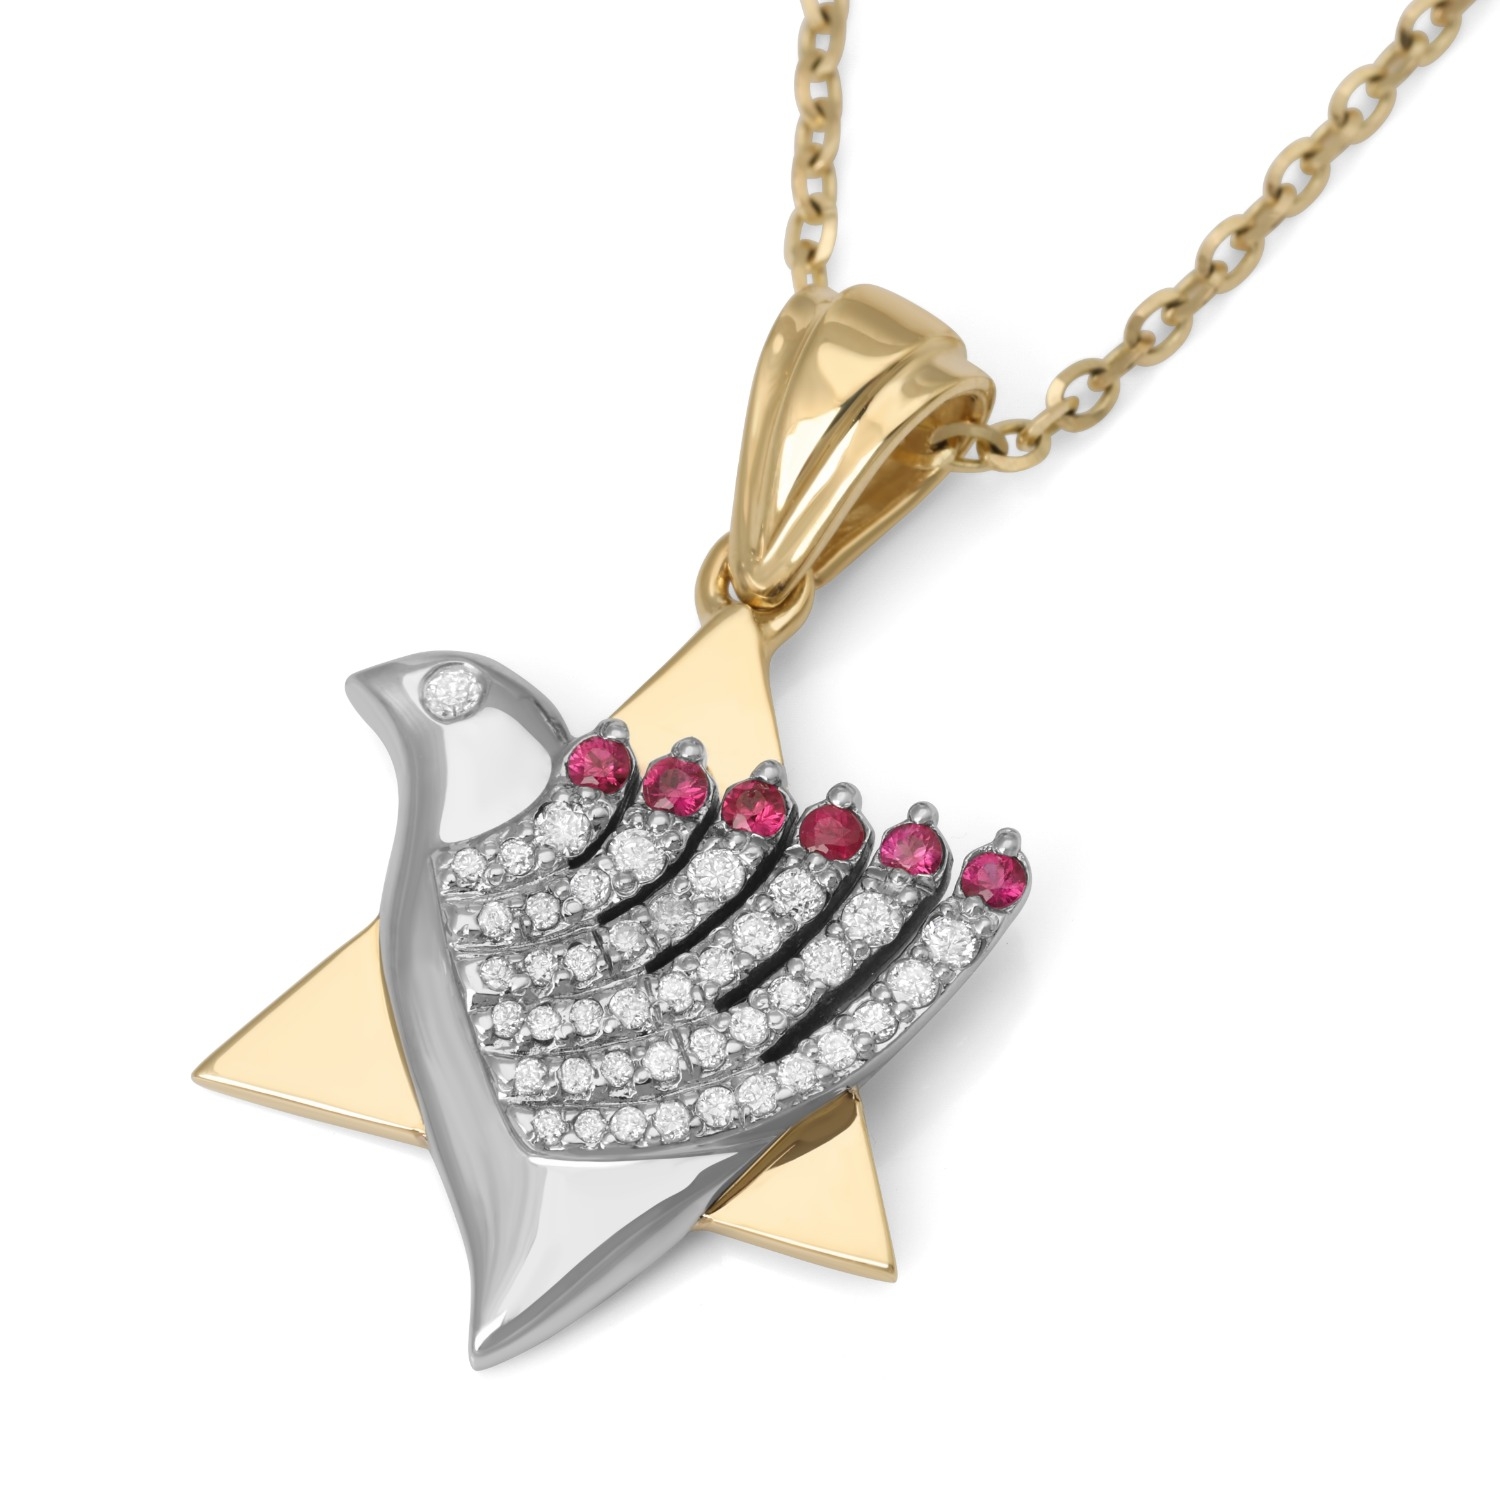 Two-Toned 14K Gold Star of David and Dove of Peace Pendant With Diamonds and Ruby Stones - 1